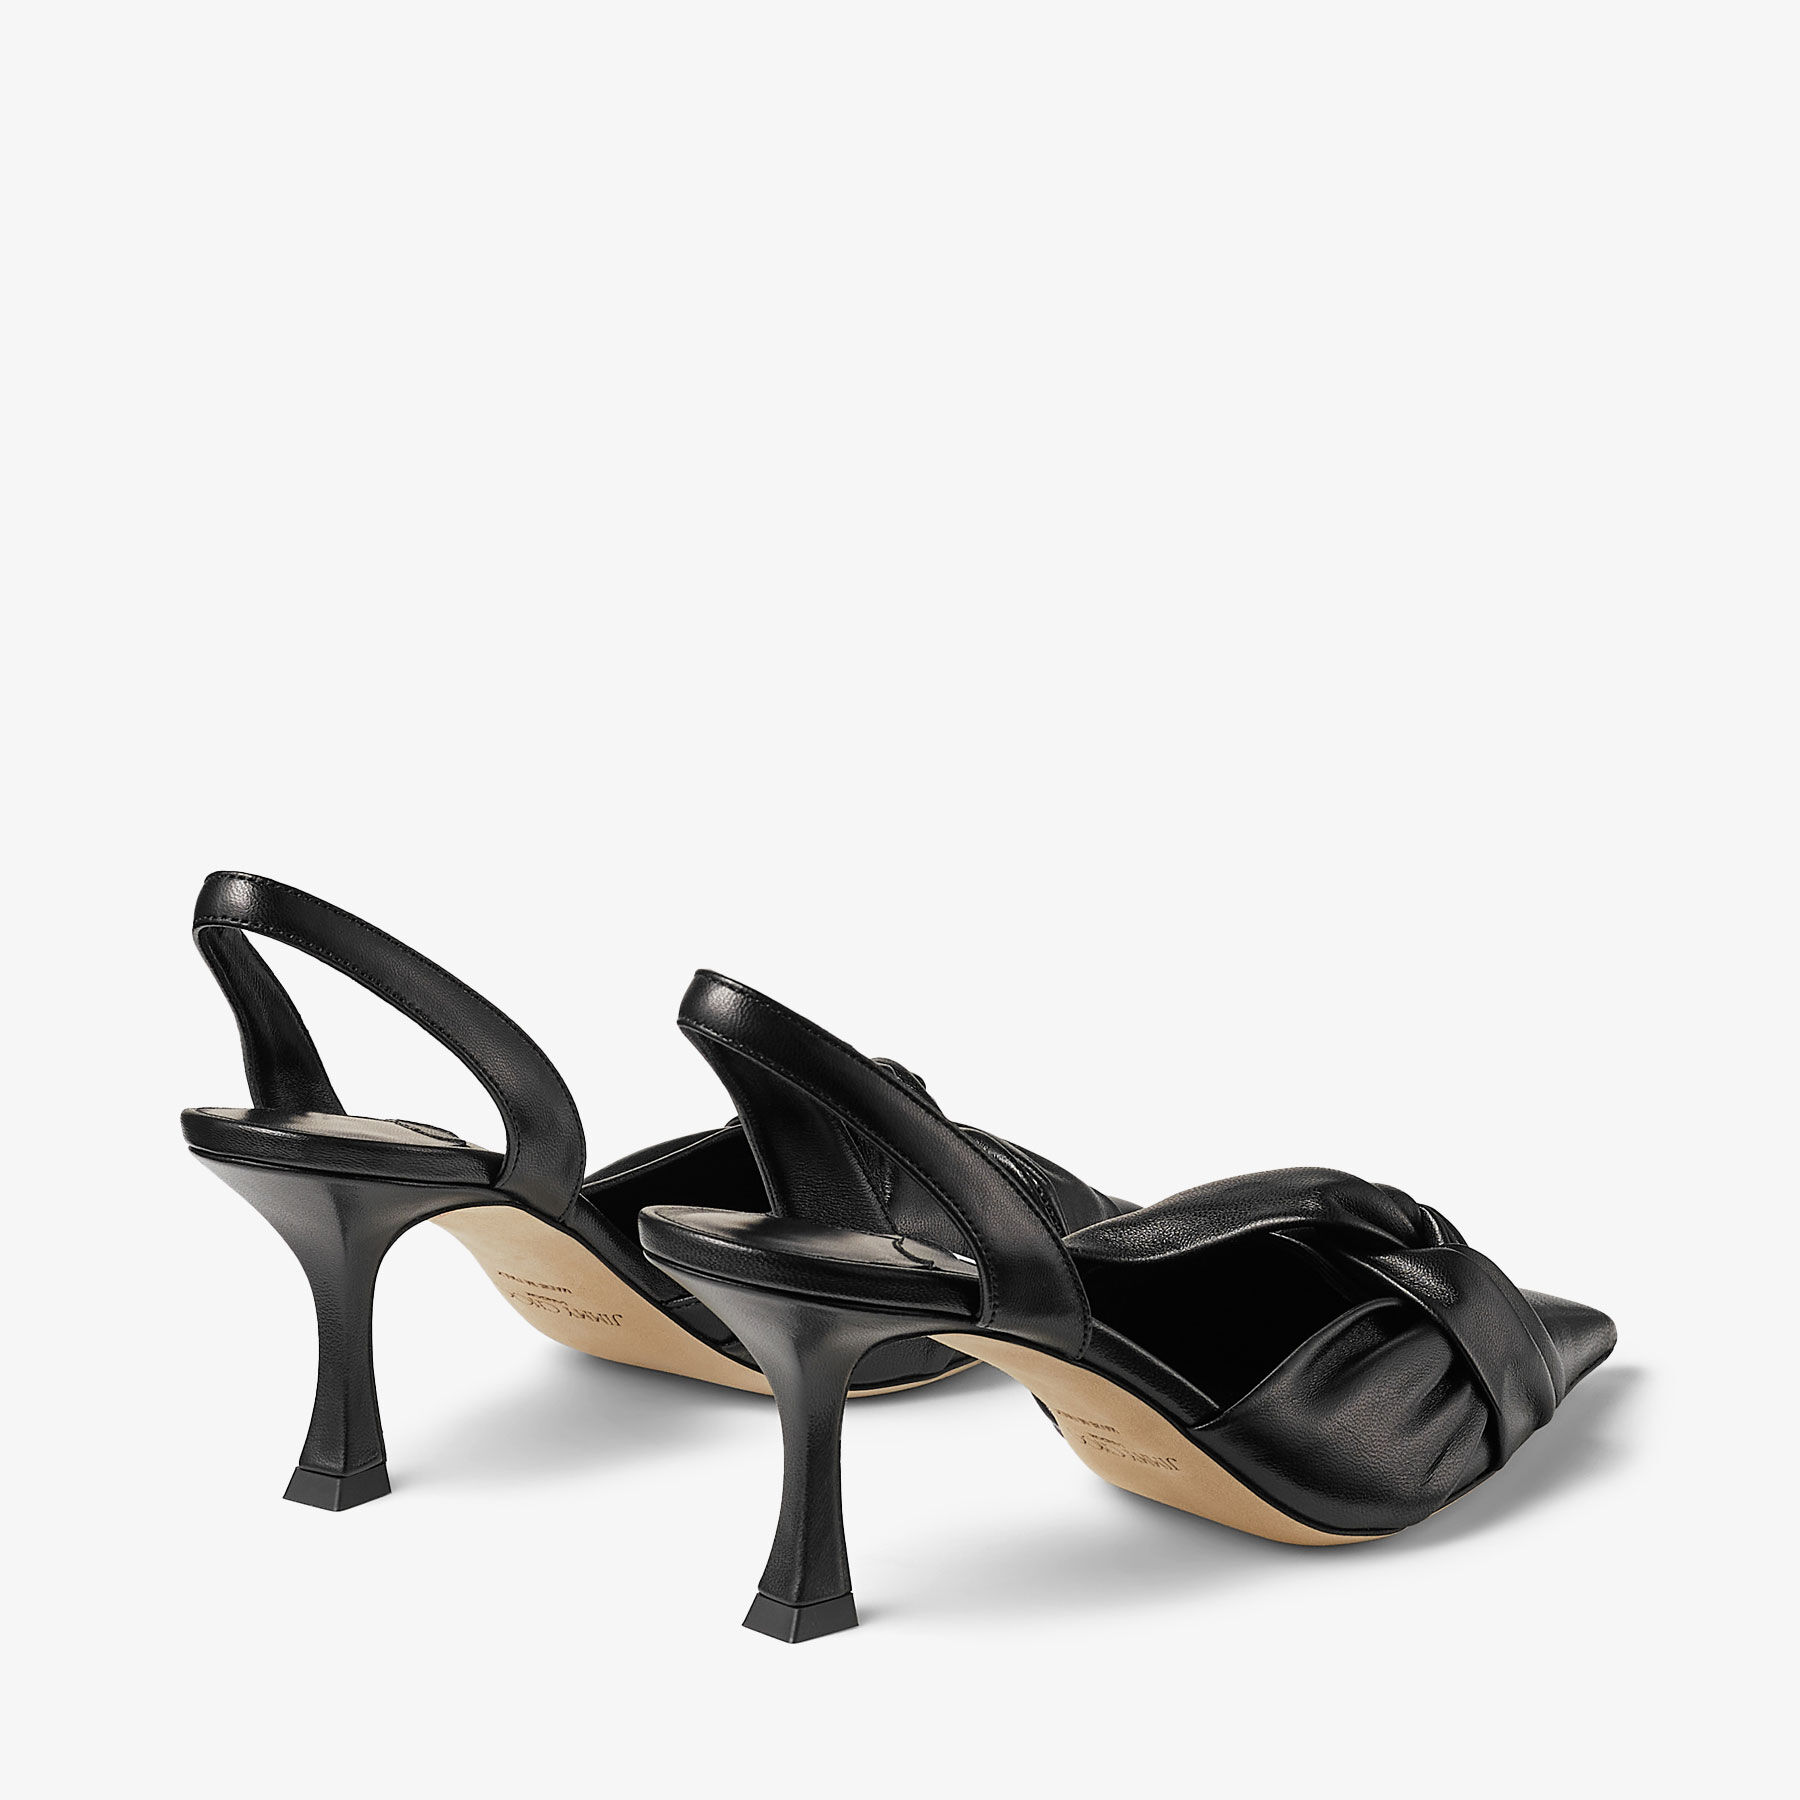 Hedera Sb 70 | Black Nappa Leather Sling Back Pumps | New Collection ...